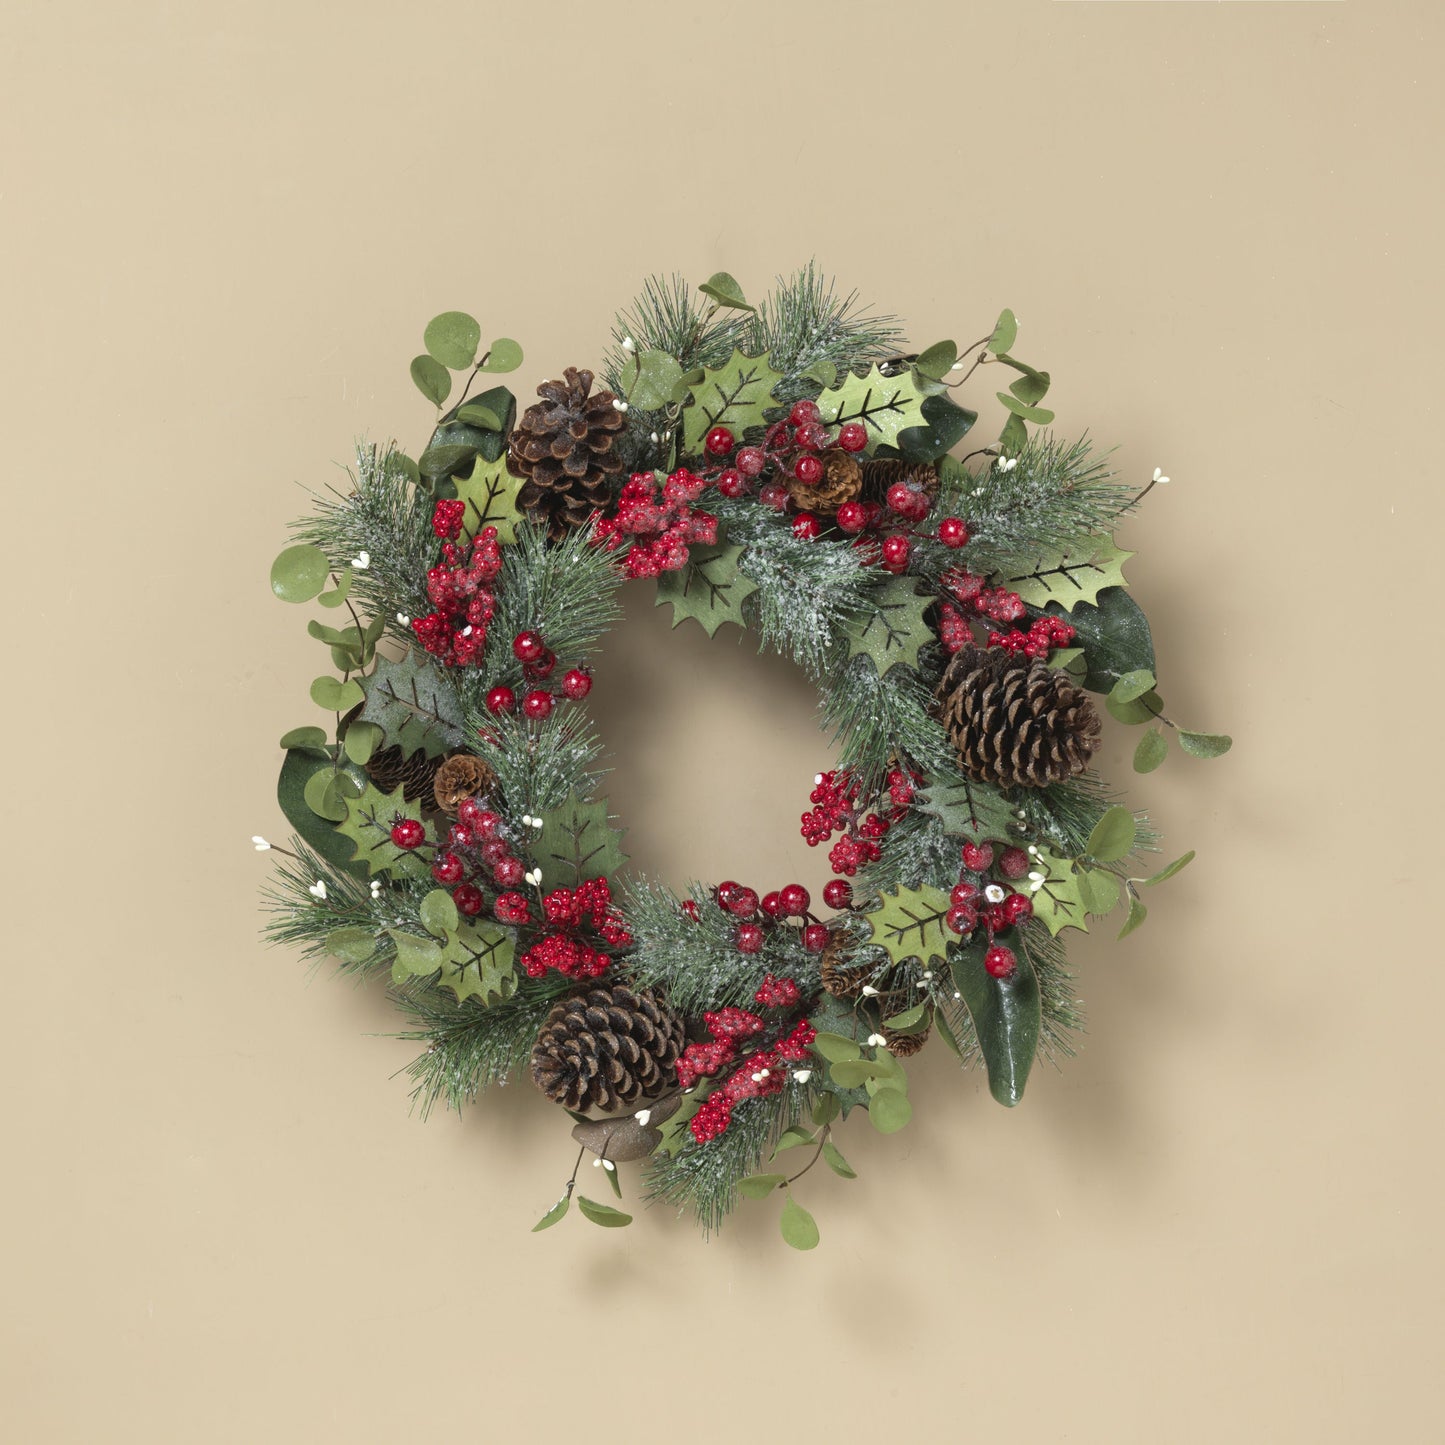 Gerson Company 24"D Holiday Wreath W/ Pinecone & Berry Accent